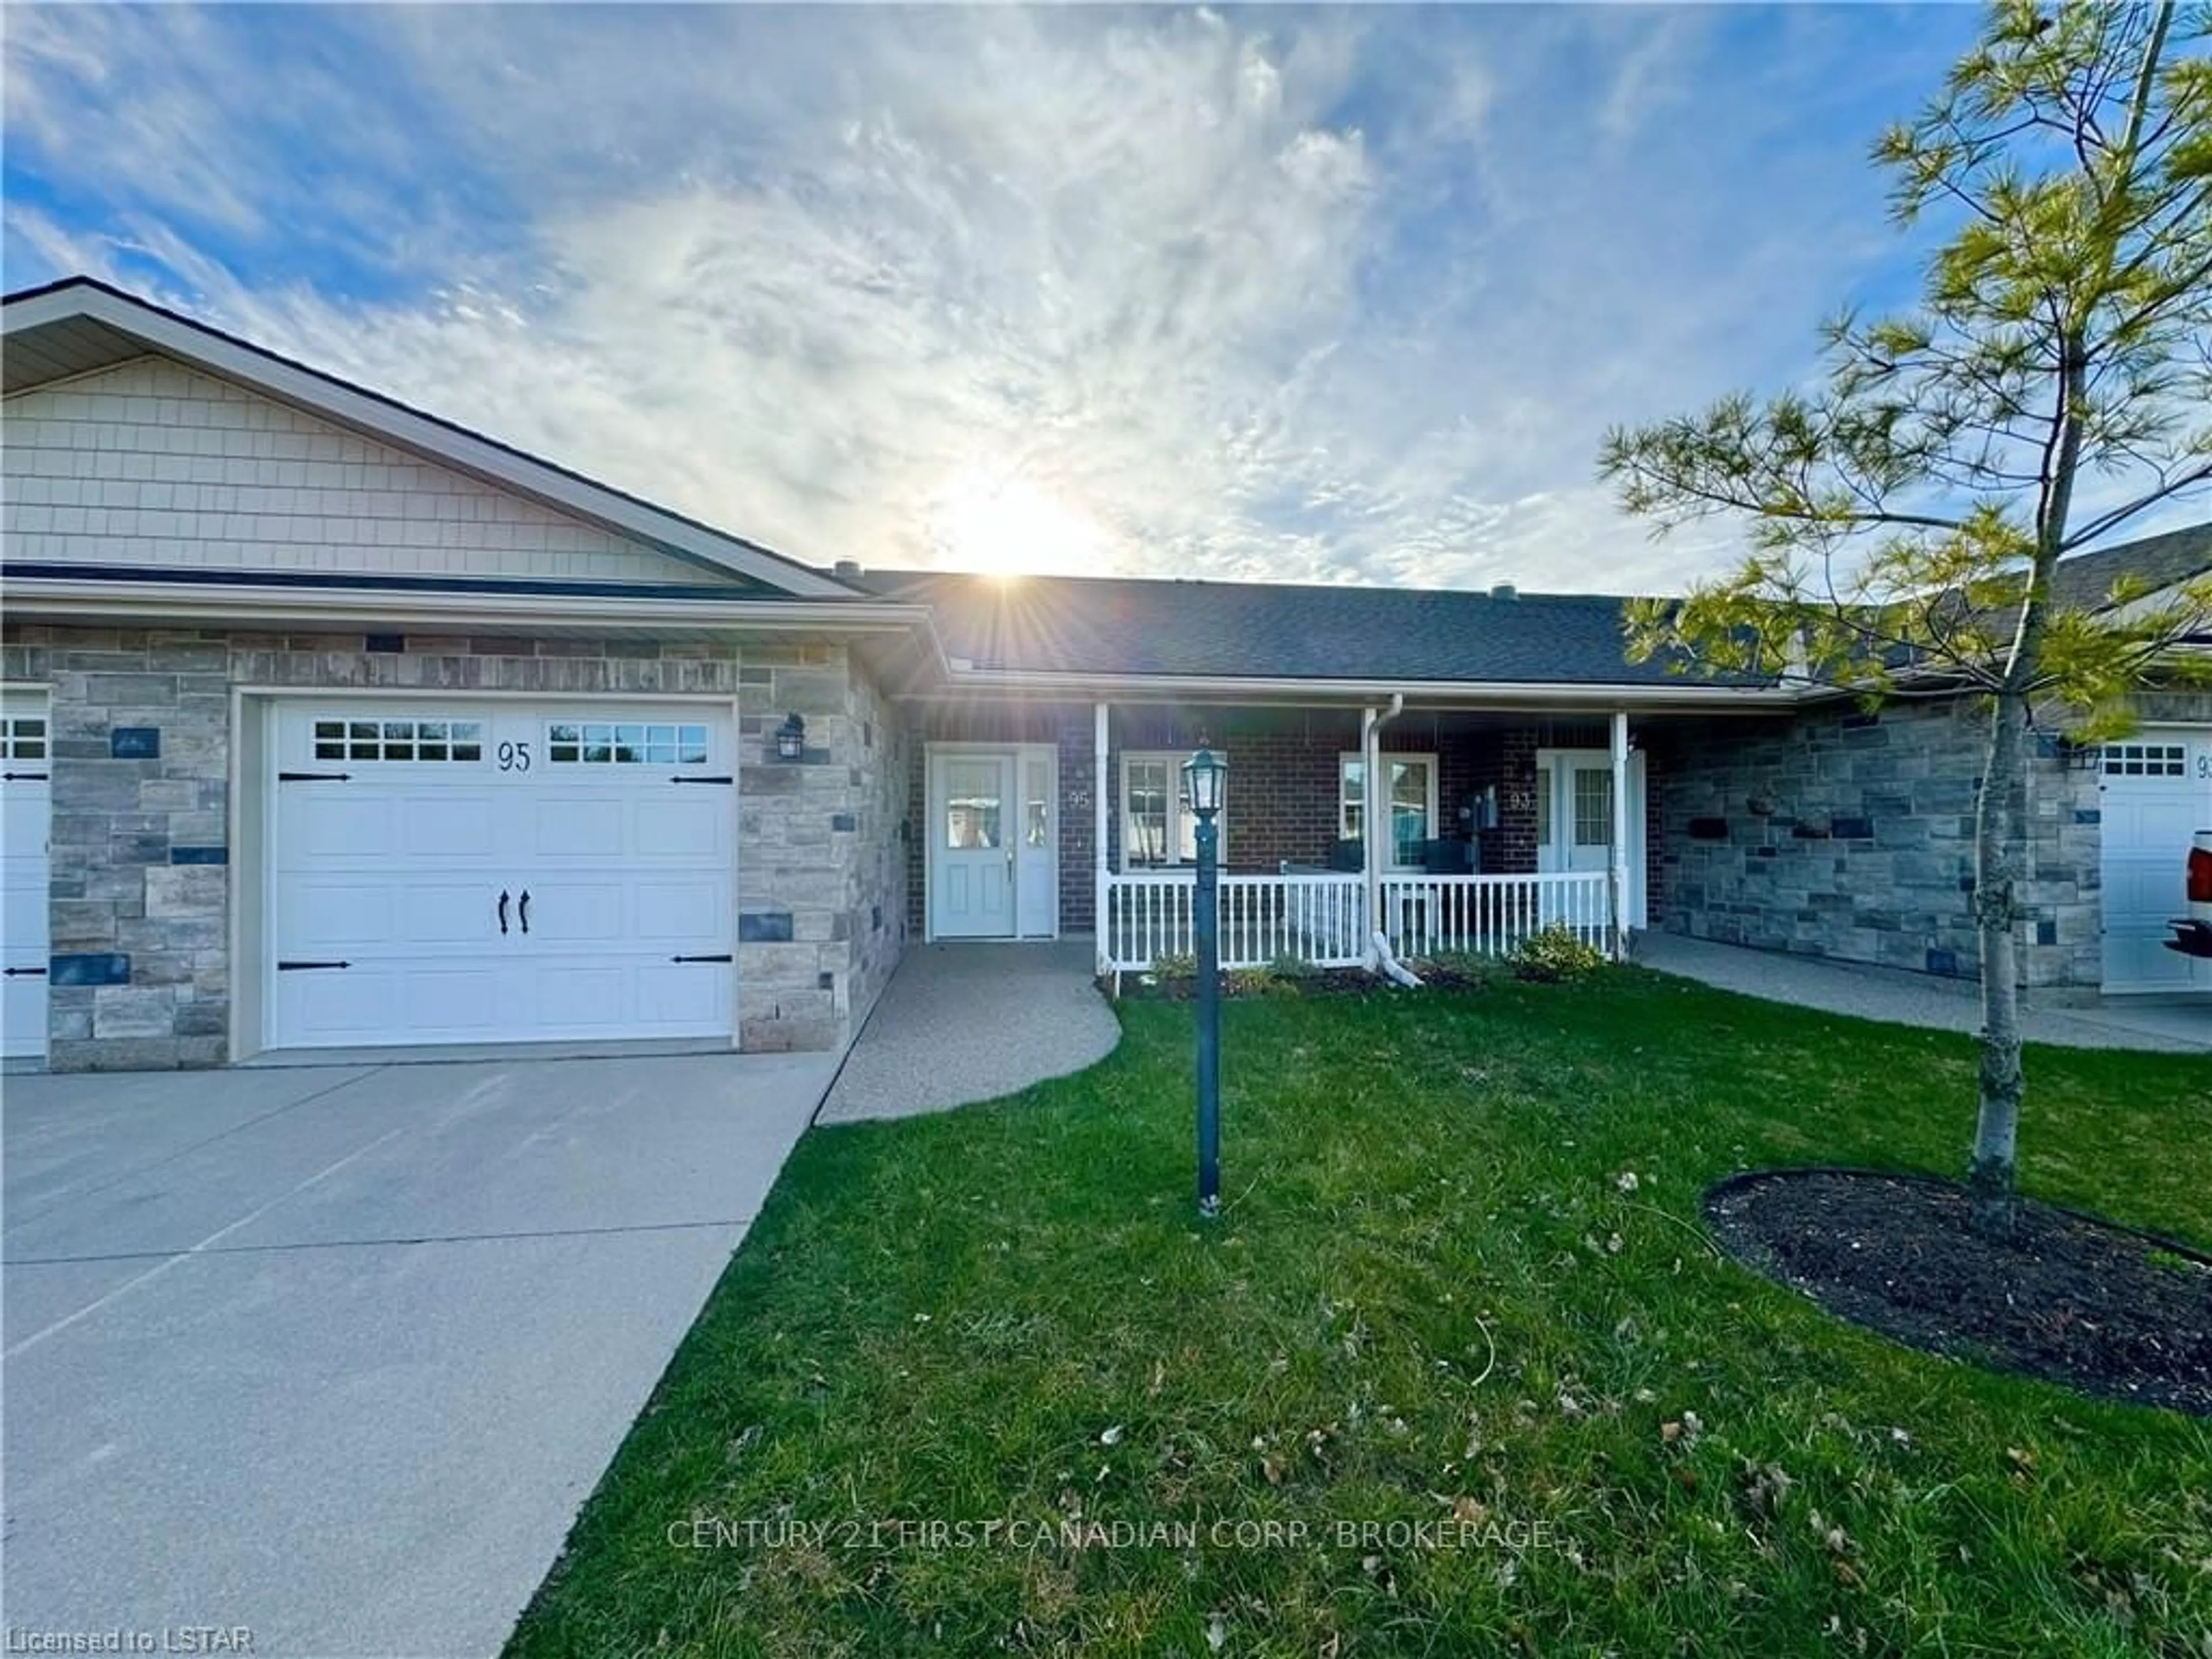 Frontside or backside of a home for 95 Redford Dr, South Huron Ontario N0M 1S3